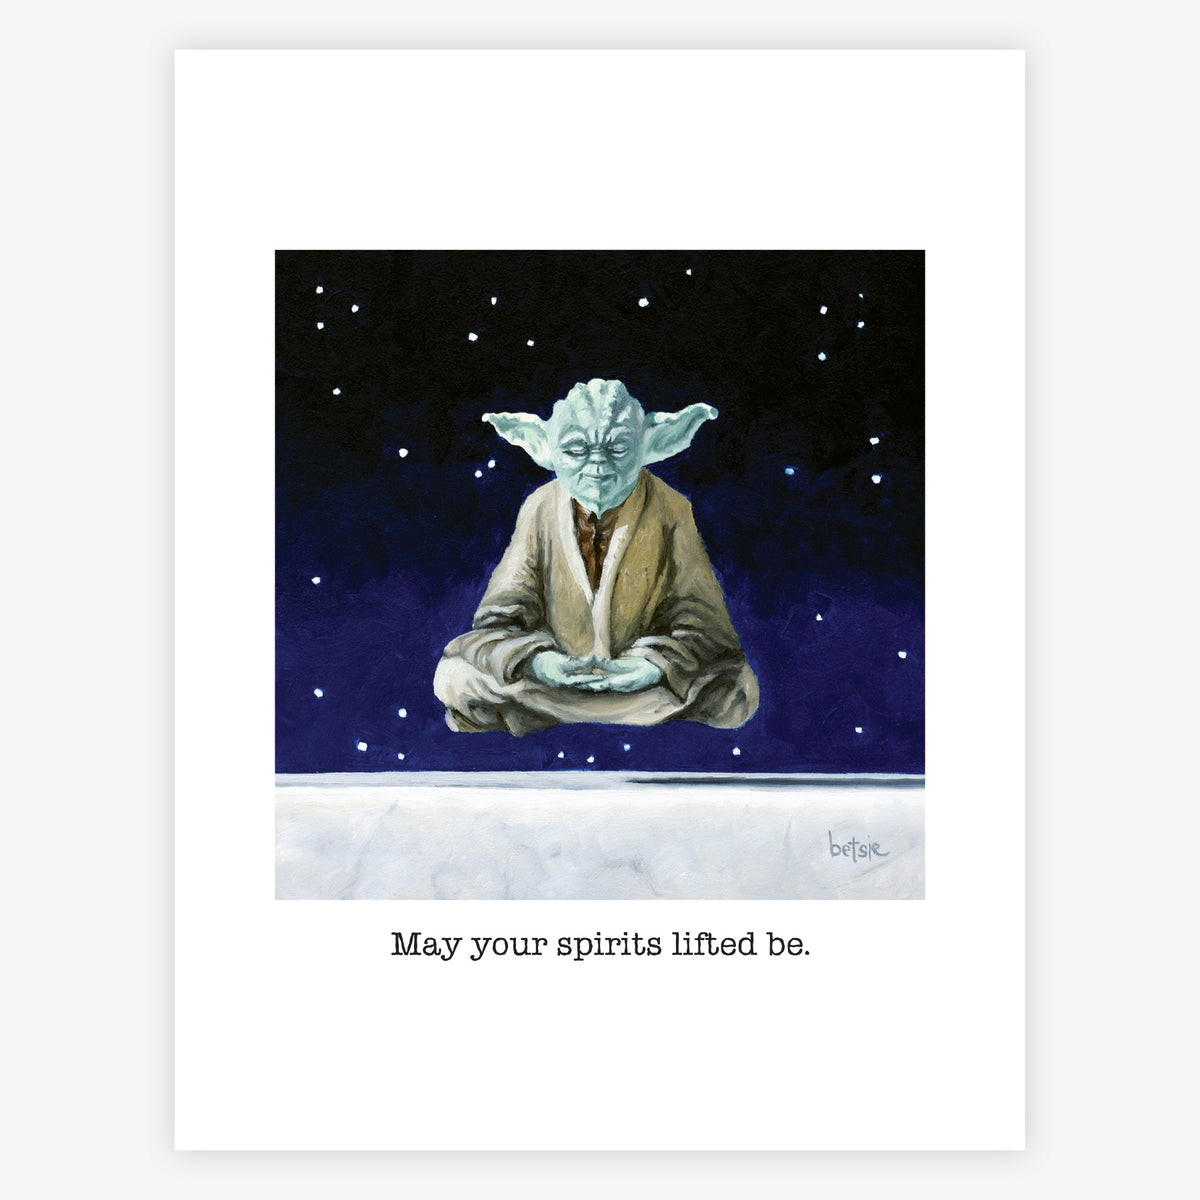 "May your spirits lifted be" Greeting Card